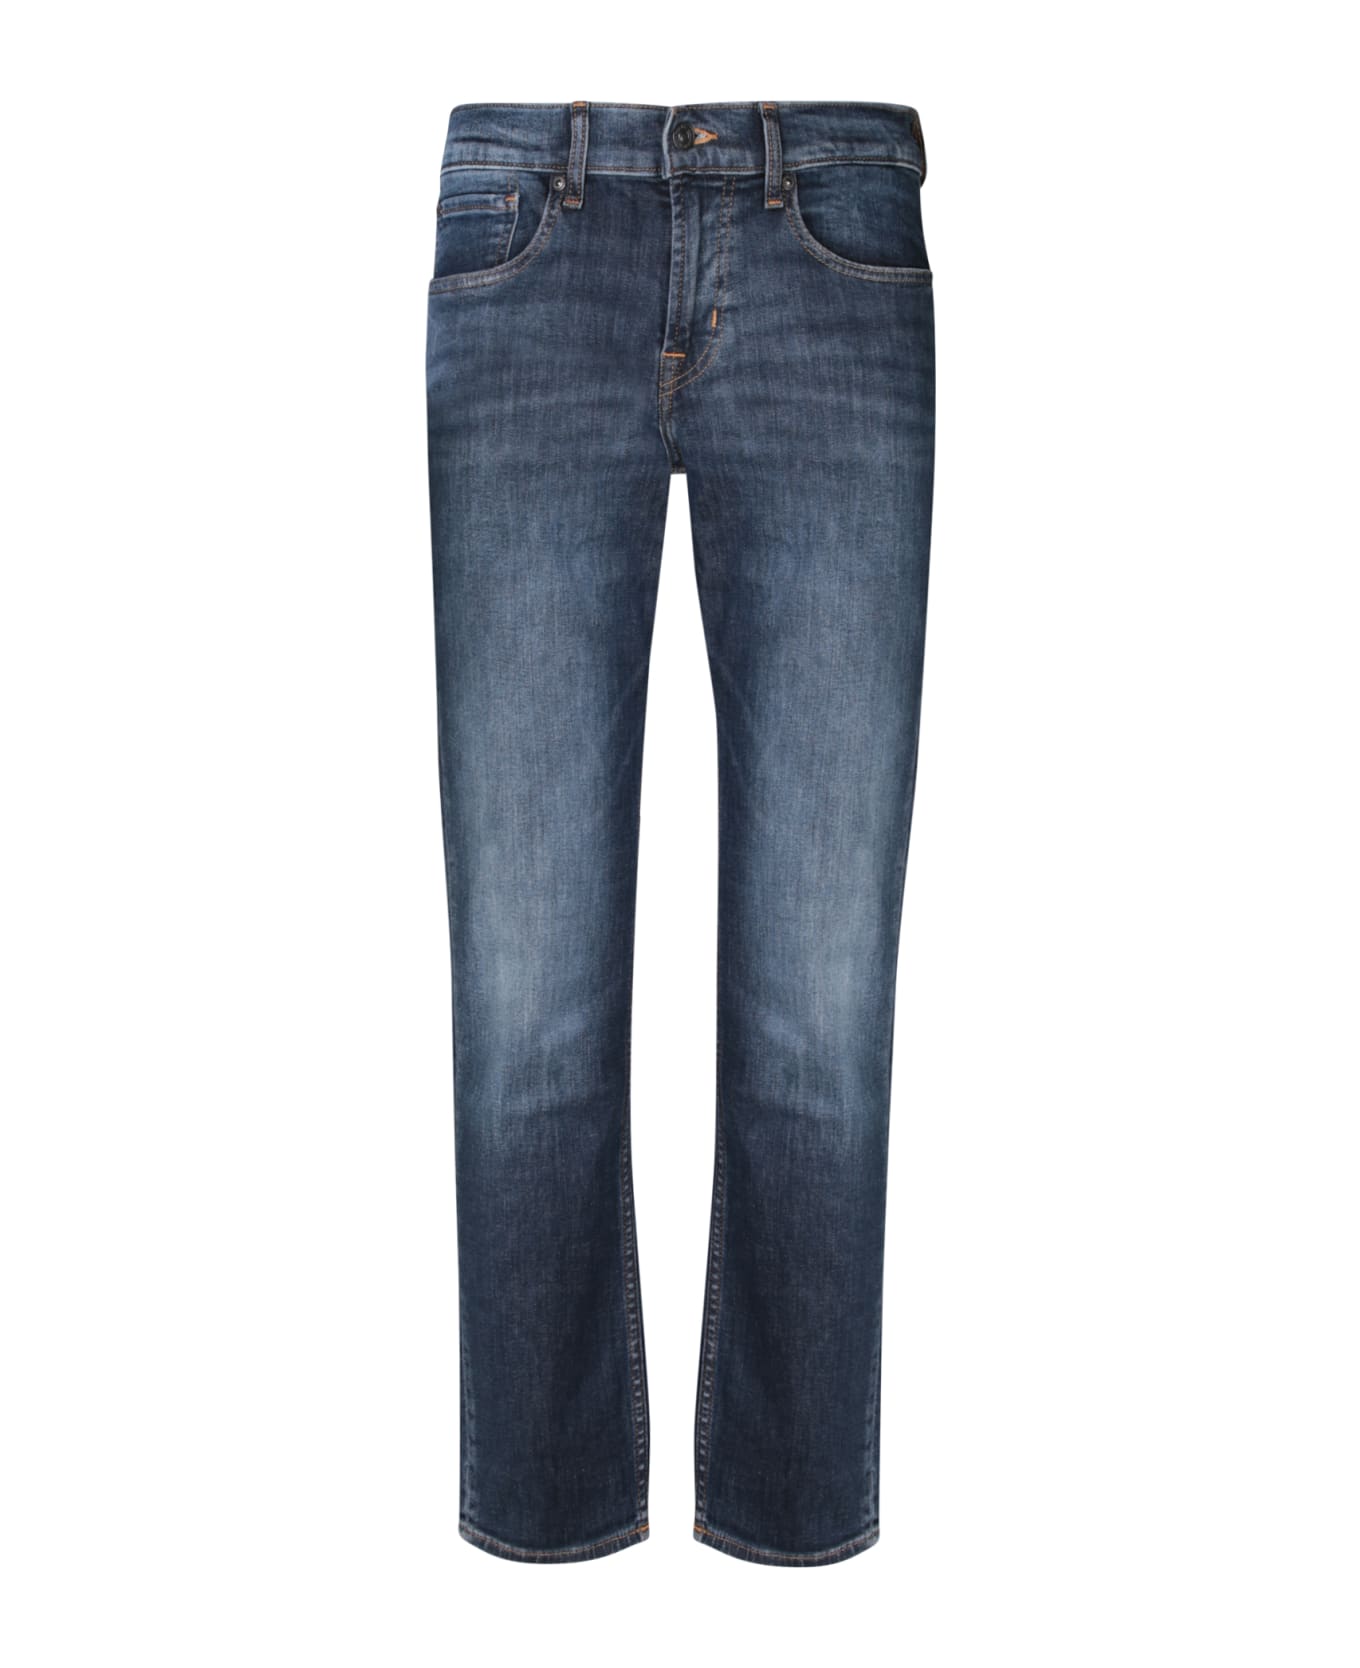 7 For All Mankind Slimmy Tapered Dark Blue Jeans - Blue デニム